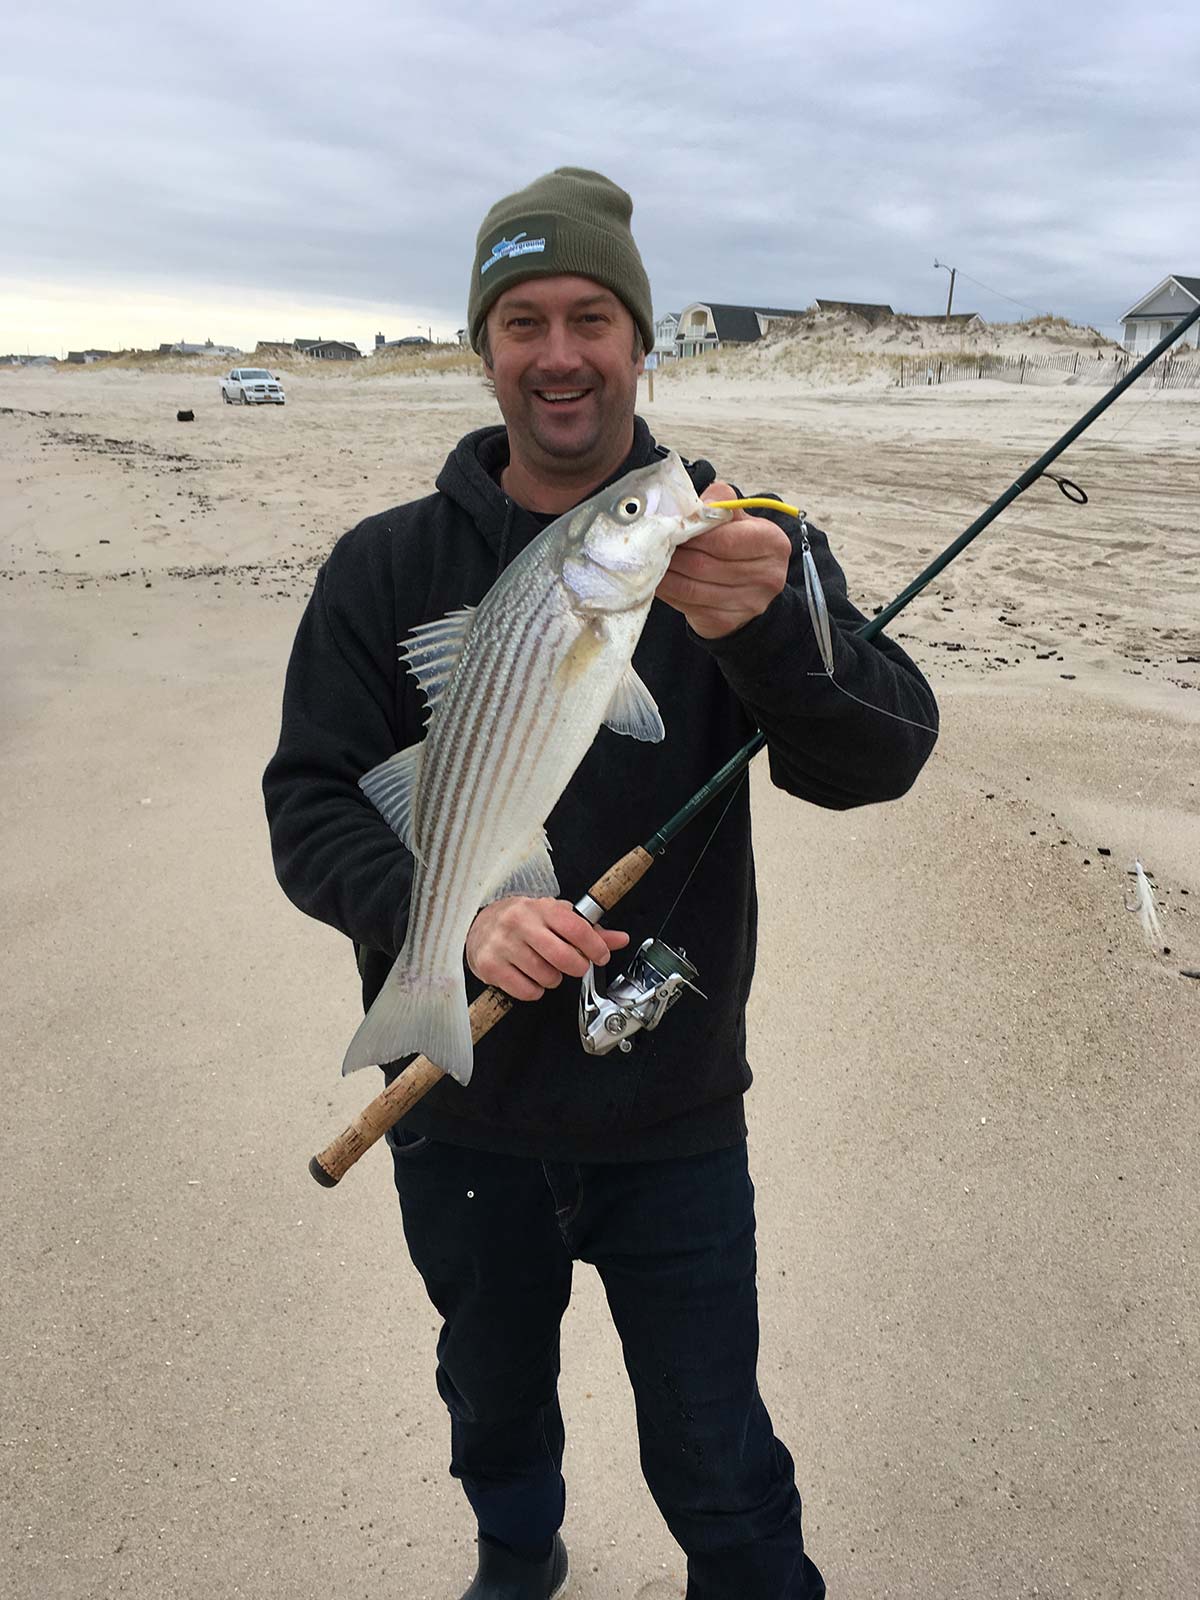 South Jersey Surfcasting - On The Water